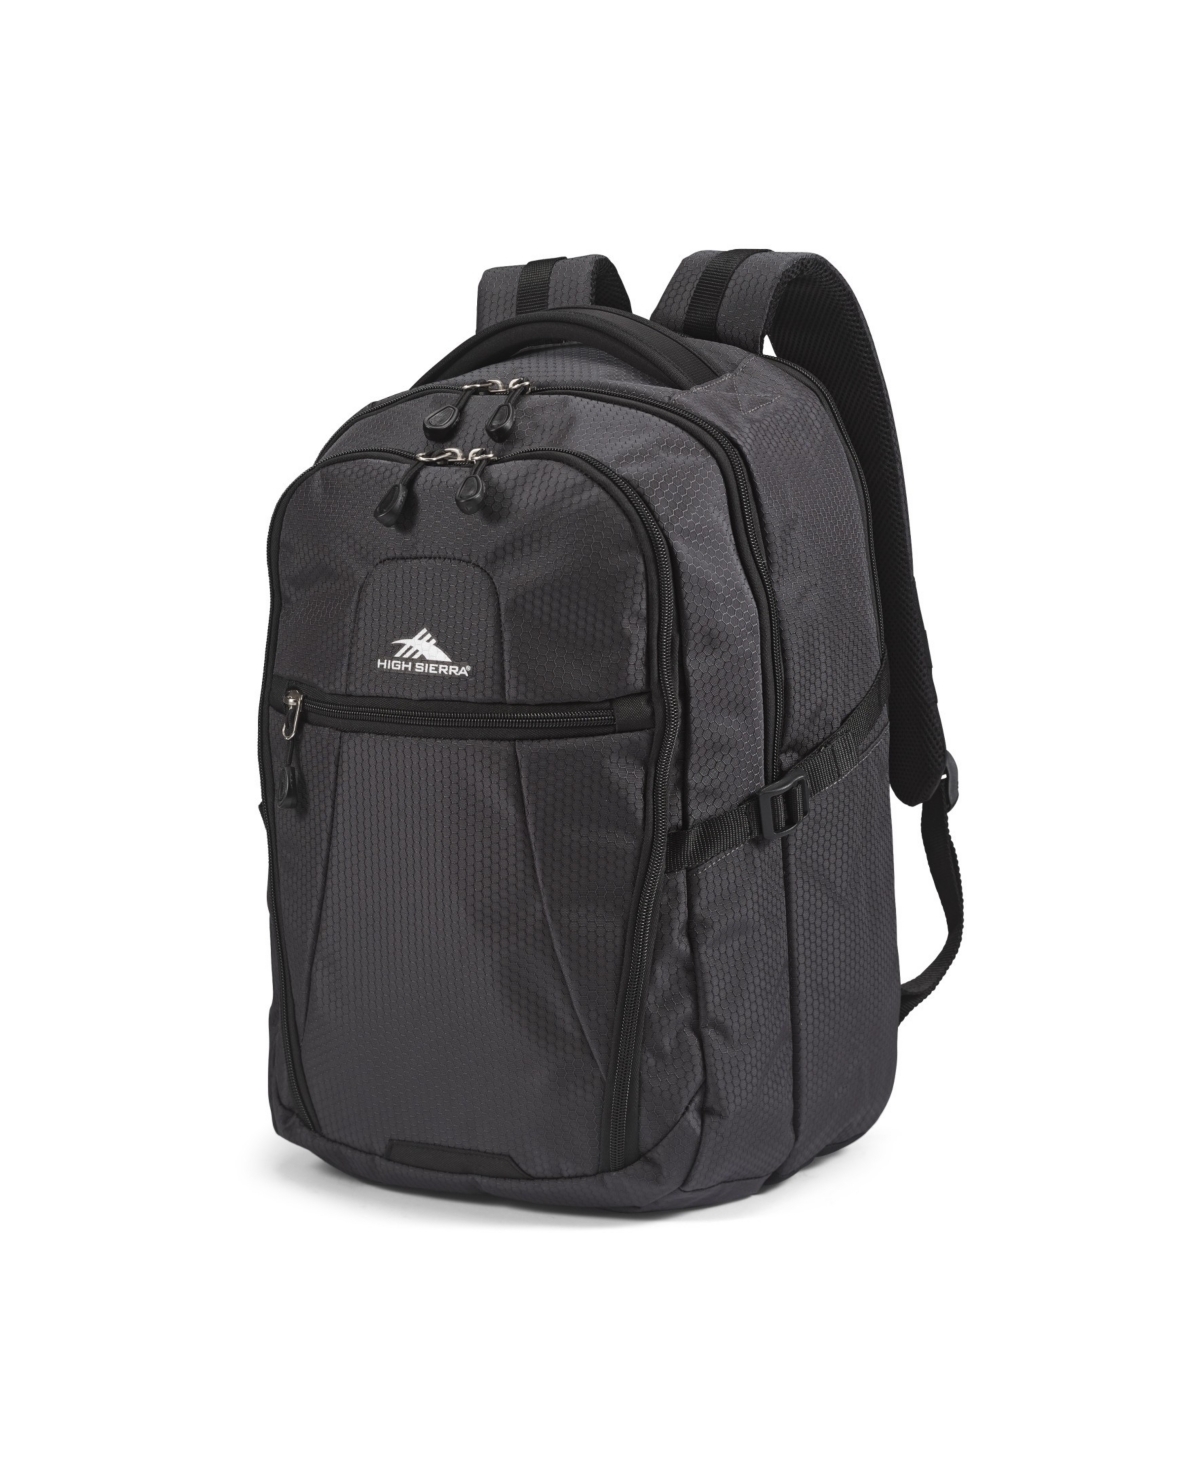 Fairlead Computer Backpack - True Navy and Graphite Blue